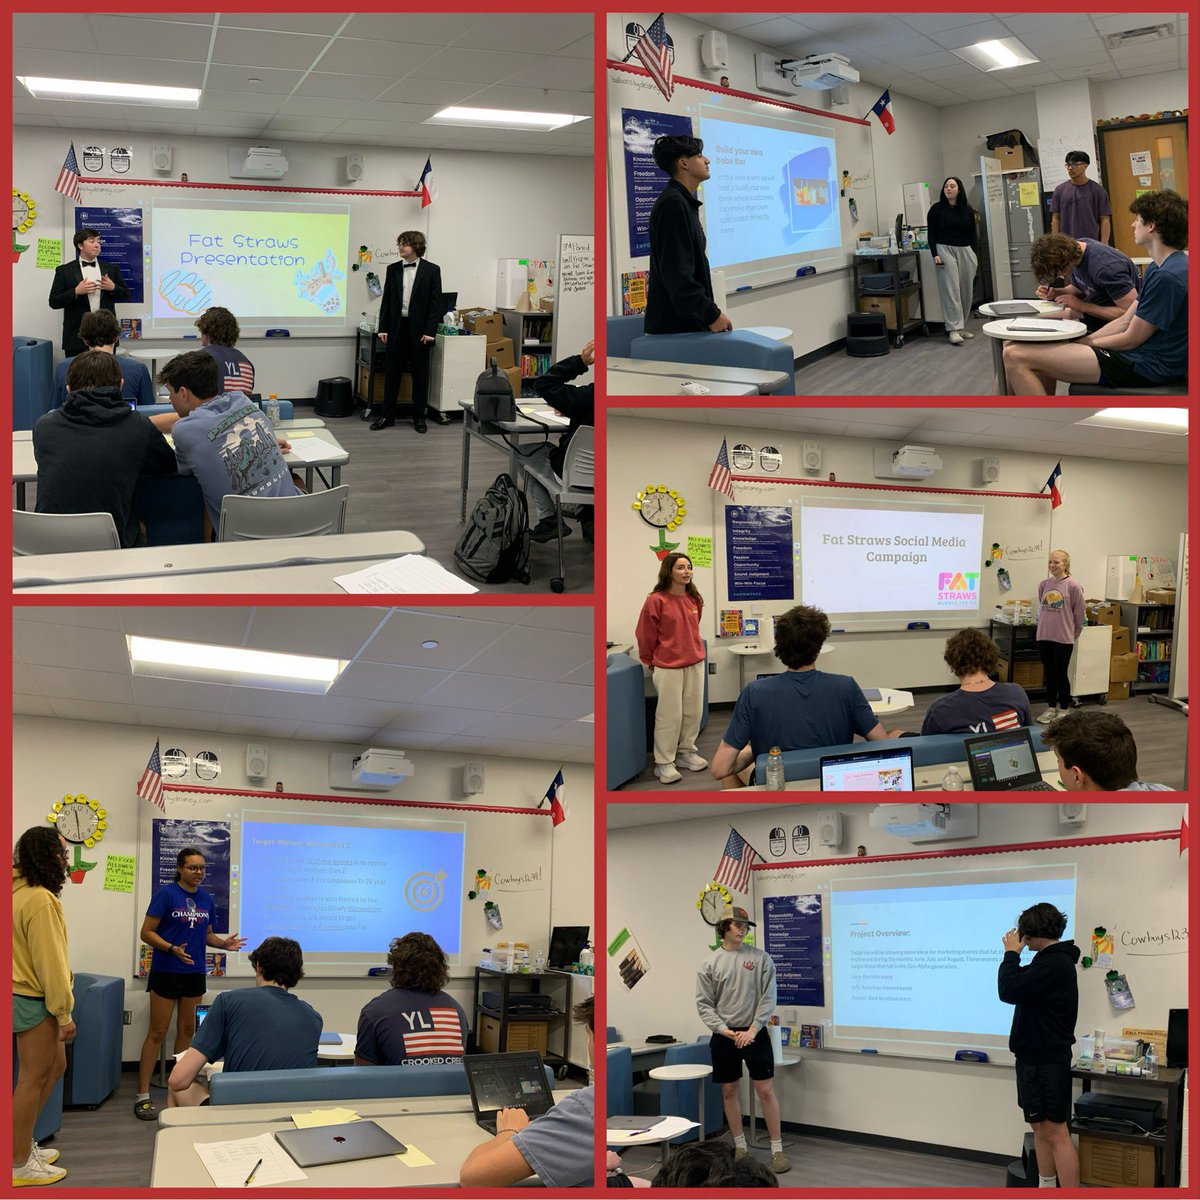 Business Management students had an amazing time presenting marketing ideas to @fatstraws. 🧋Industry partners help students gain employability skills required by business and industry. @RISD_CTE @jjpearcehs #RISDInTheClassroom #RISDBelieves #RISDWeAreOne